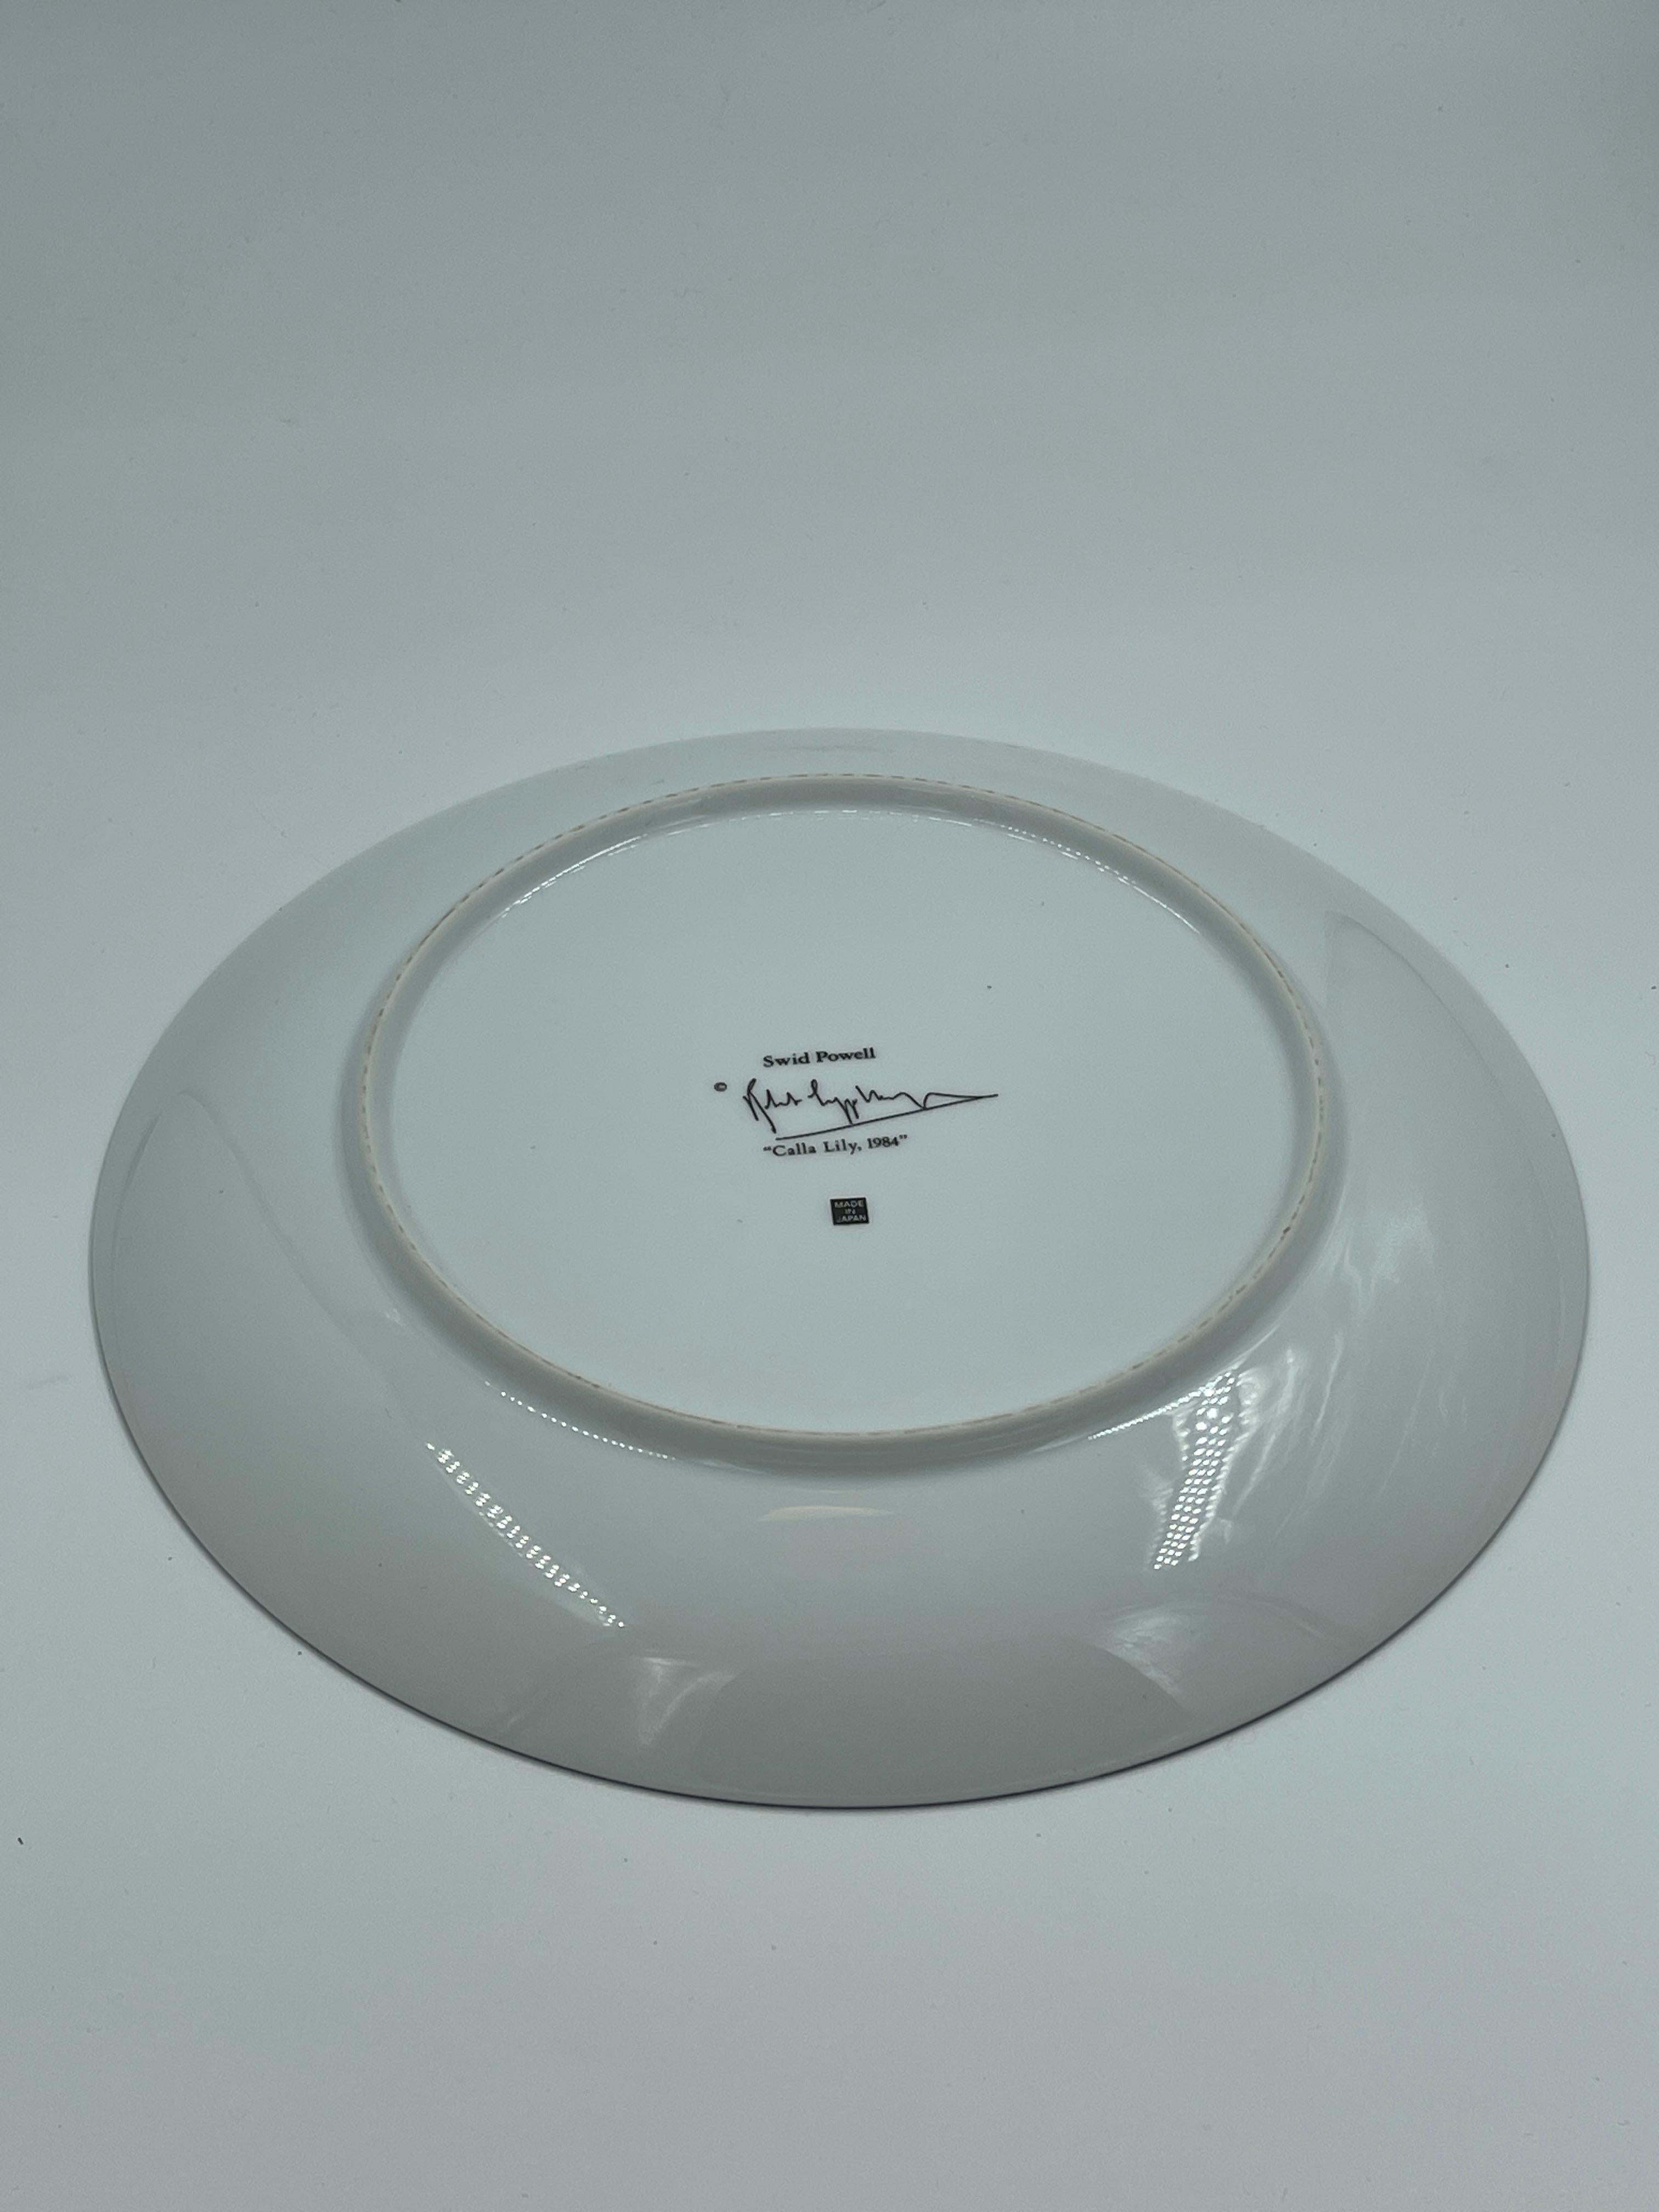 Swid Powell - Robert Mapplethorpe Porcelain Plates, Orchid - Flower - Calla Lily For Sale 1